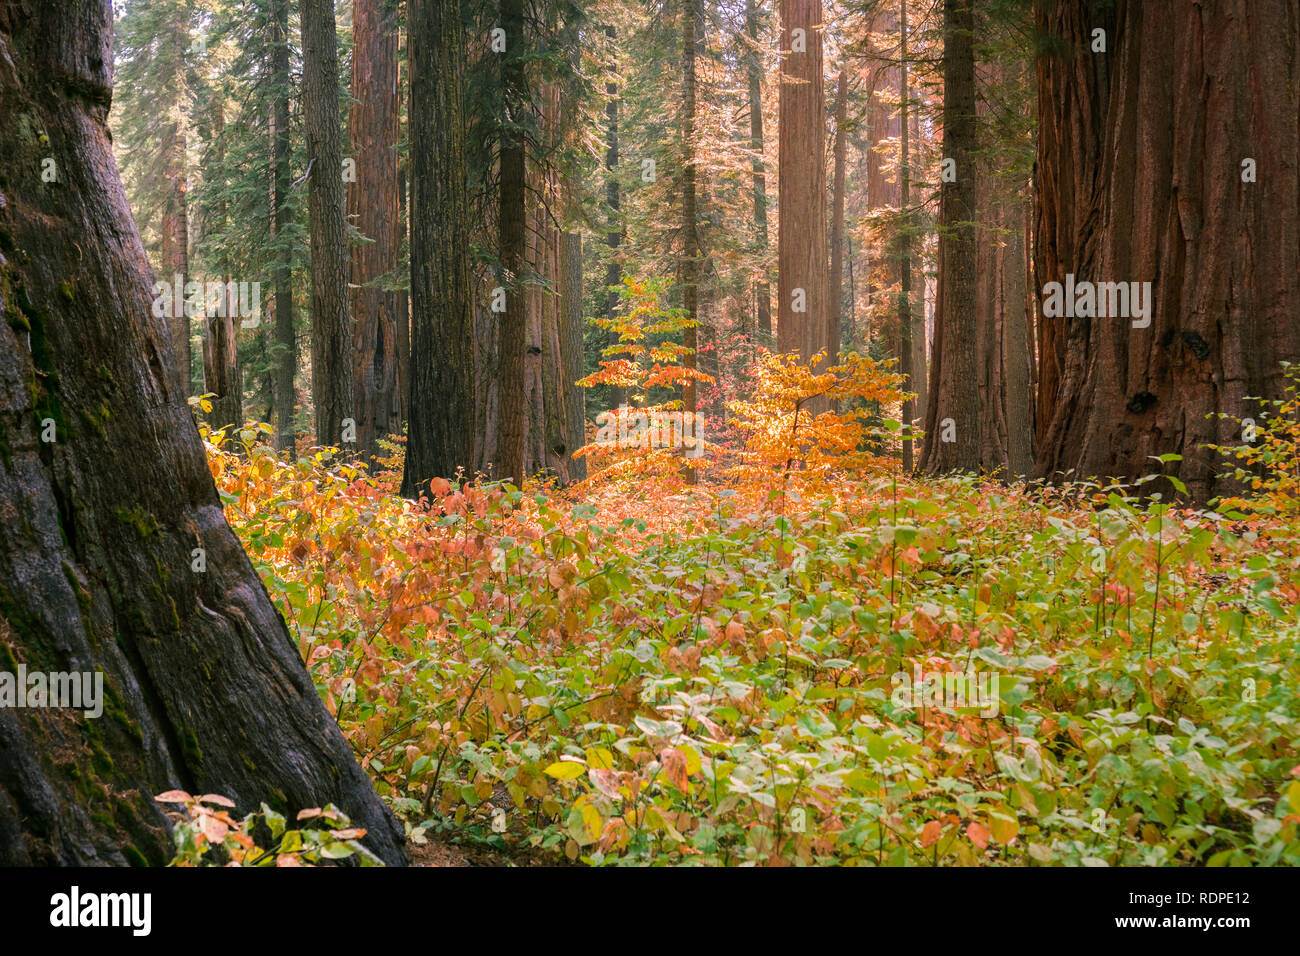 Brightly colored dogwood growing among giant sequoia trees on a sunny autumn day, Calaveras Big Trees State Park, California Stock Photo